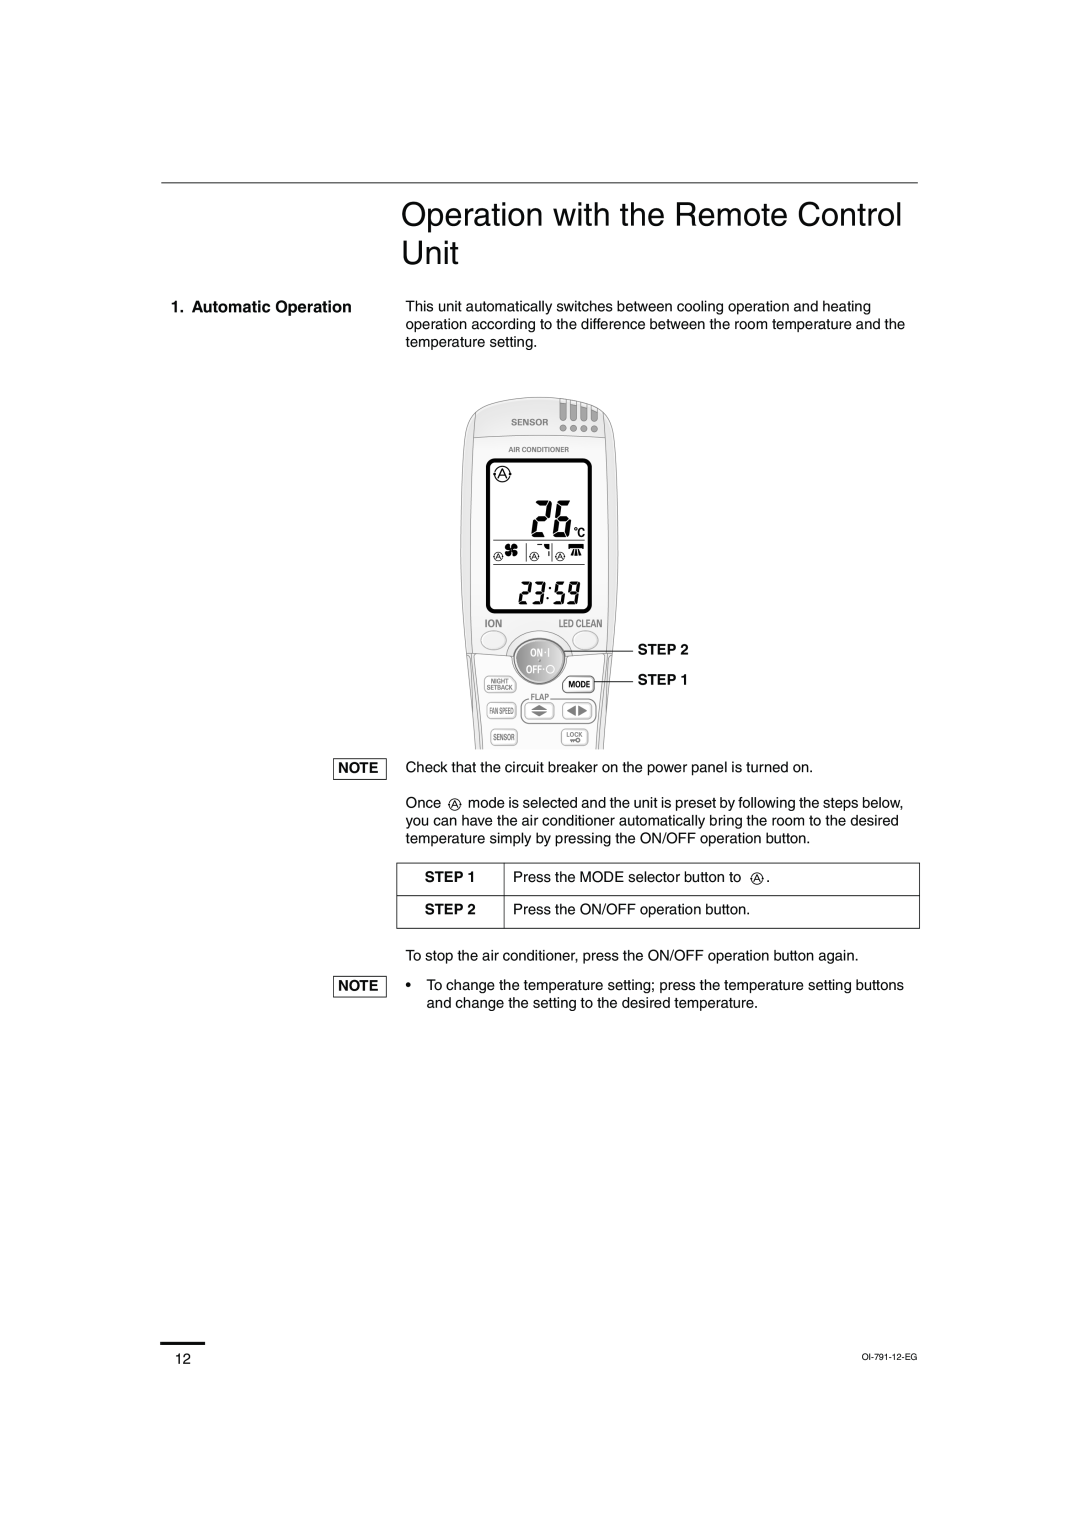 Sanyo SAP-KRV94EHDX service manual Operation with the Remote Control Unit, Automatic Operation 